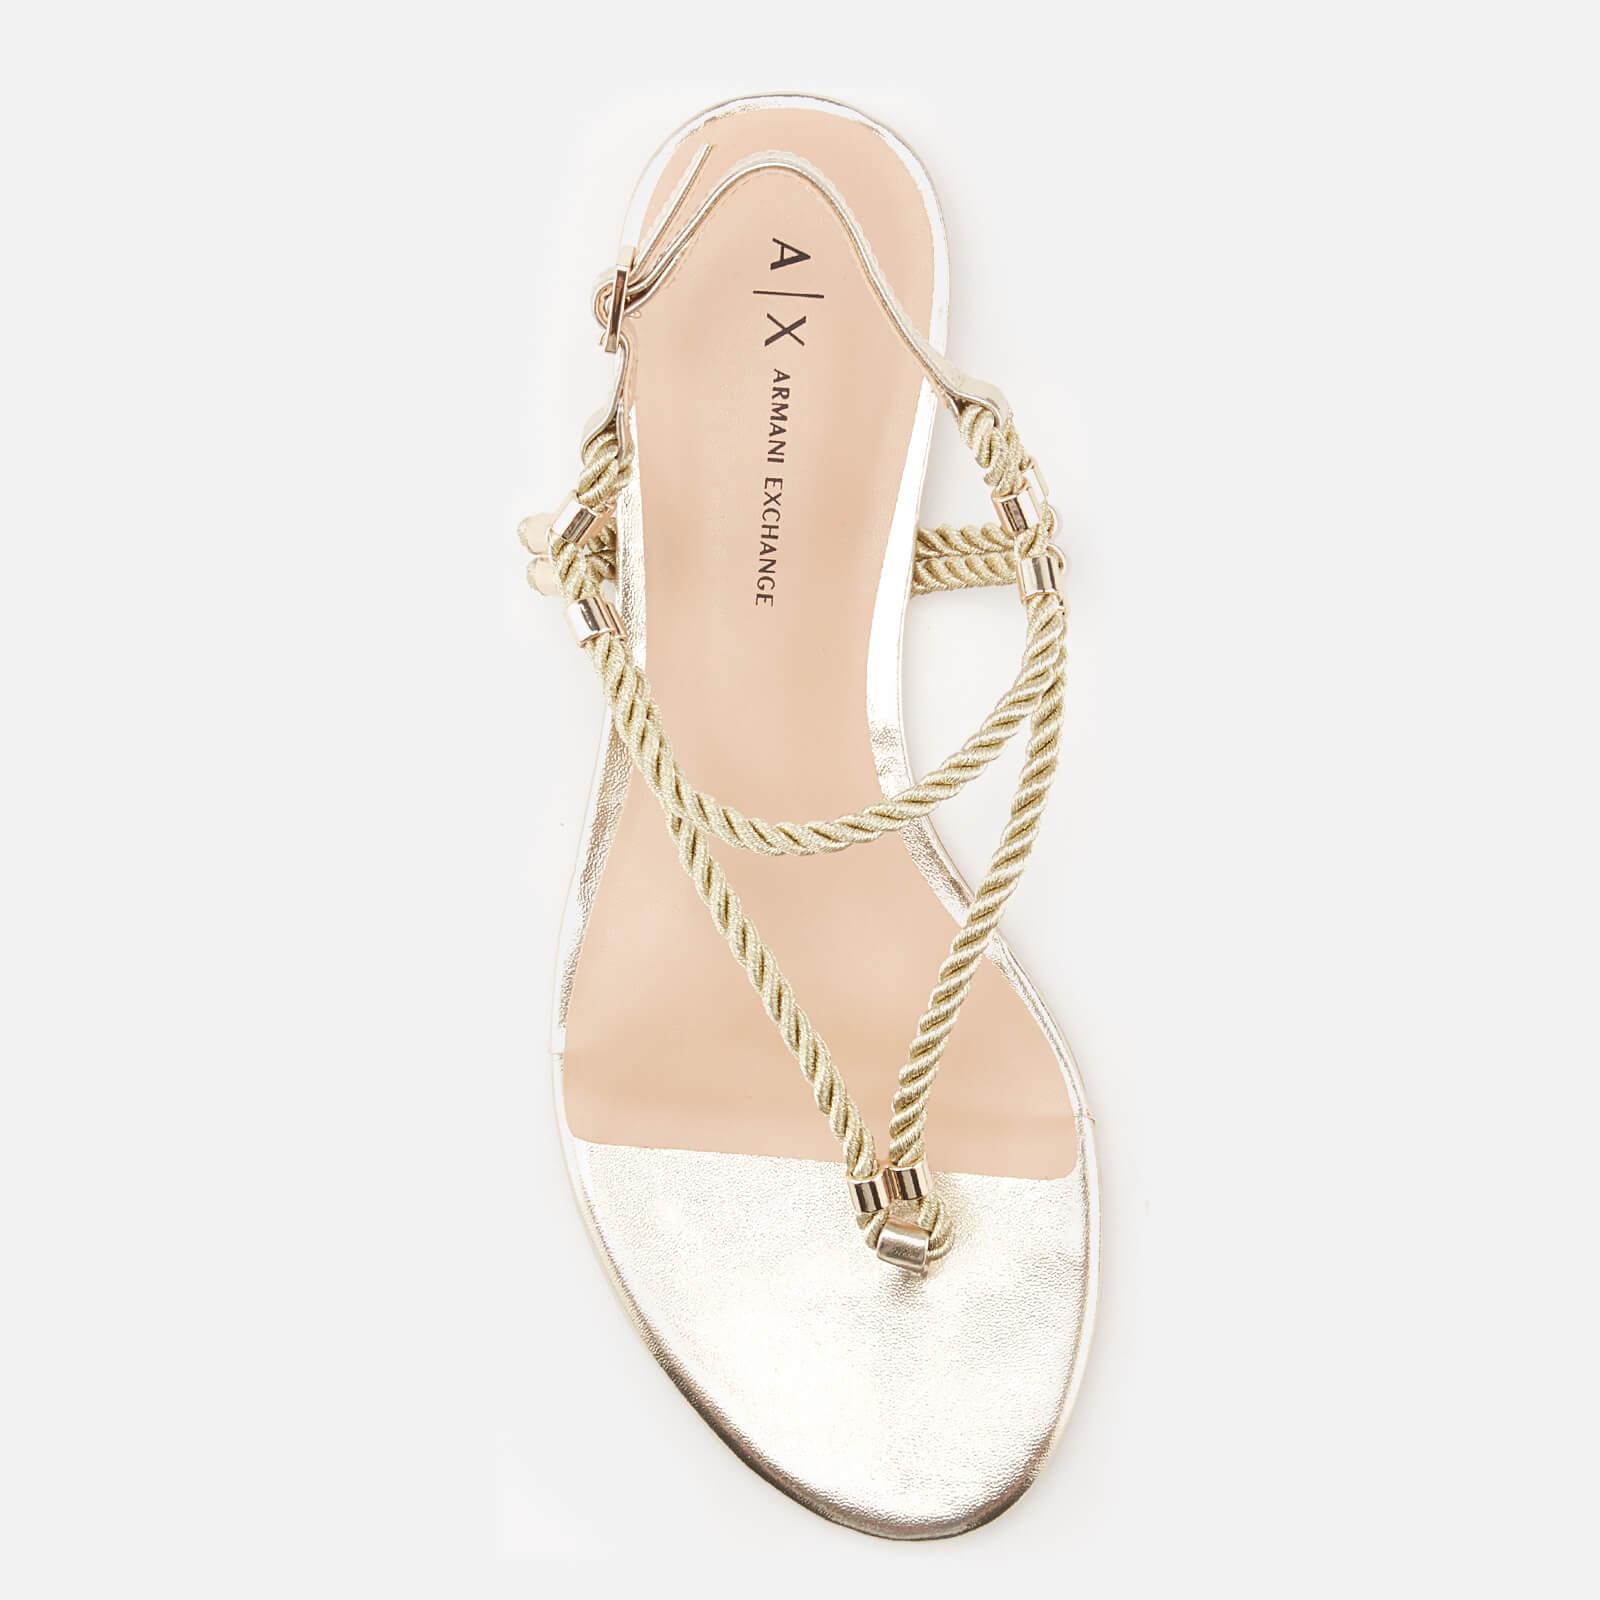 Armani Exchange Synthetic Rope T-bar Sandals in Gold (Metallic) | Lyst